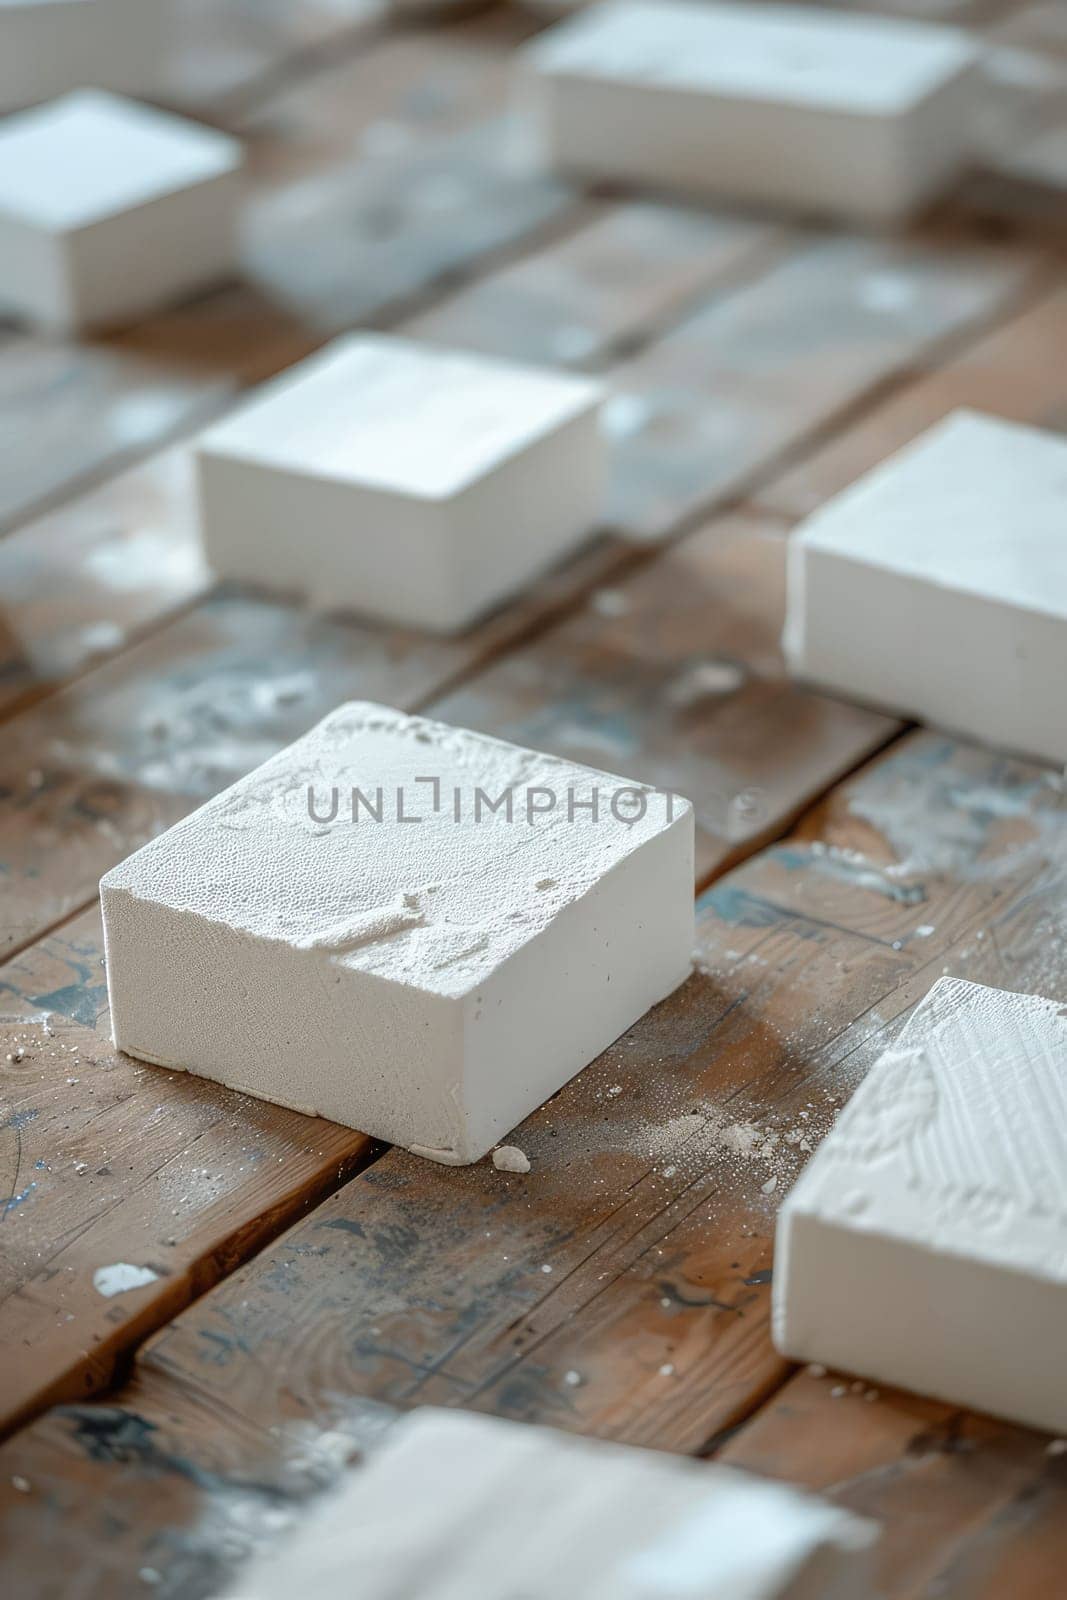 Styrofoam Board Detail: Versatile Material for Packing and Insulation Projects. Expanded polystyrene plates. A stack of building materials for house insulation